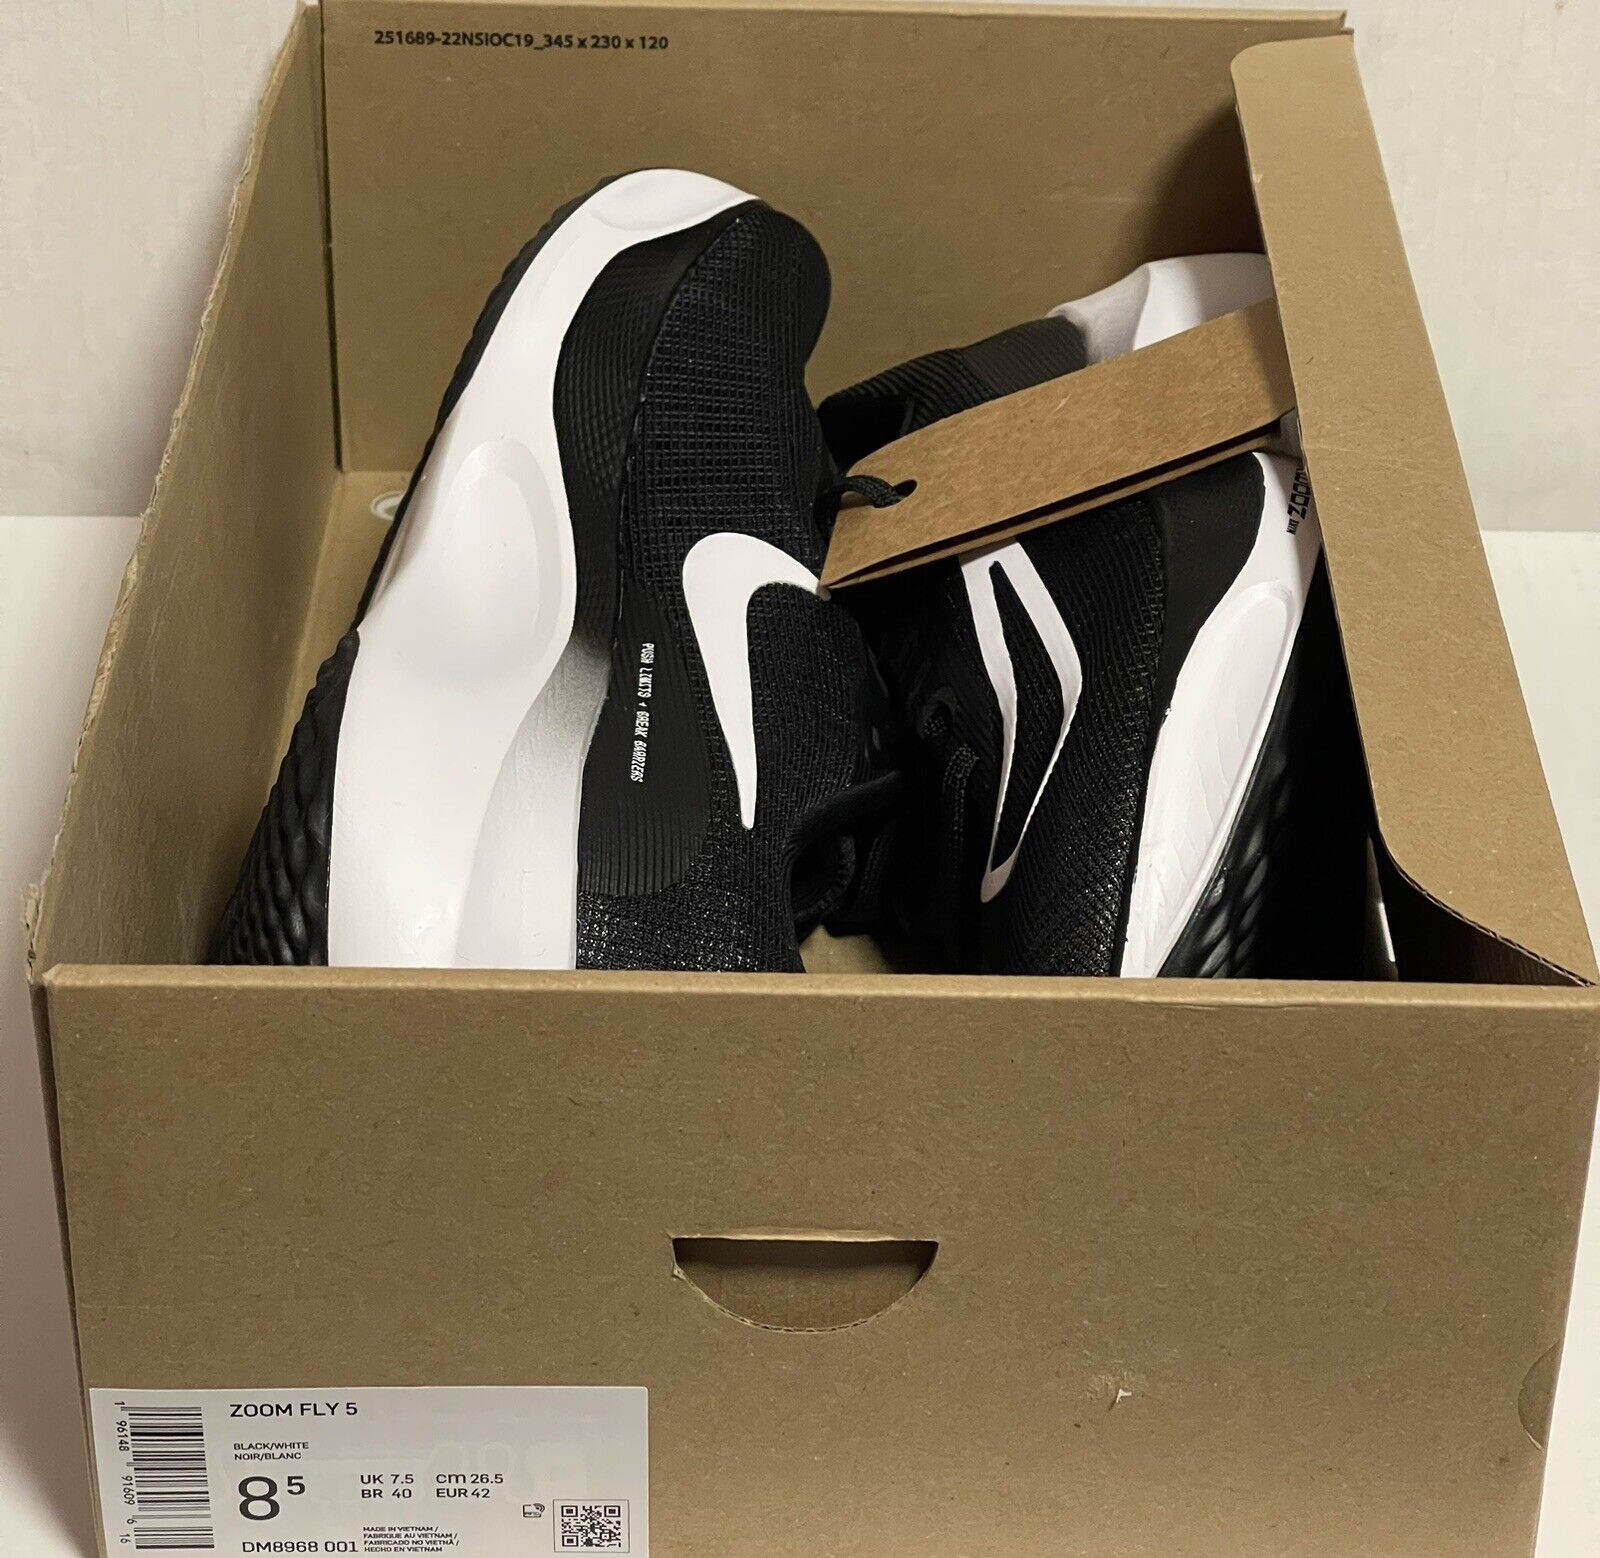 New Nike Zoom Fly 5 in Black/White Colour Size US 8.5 | eBay